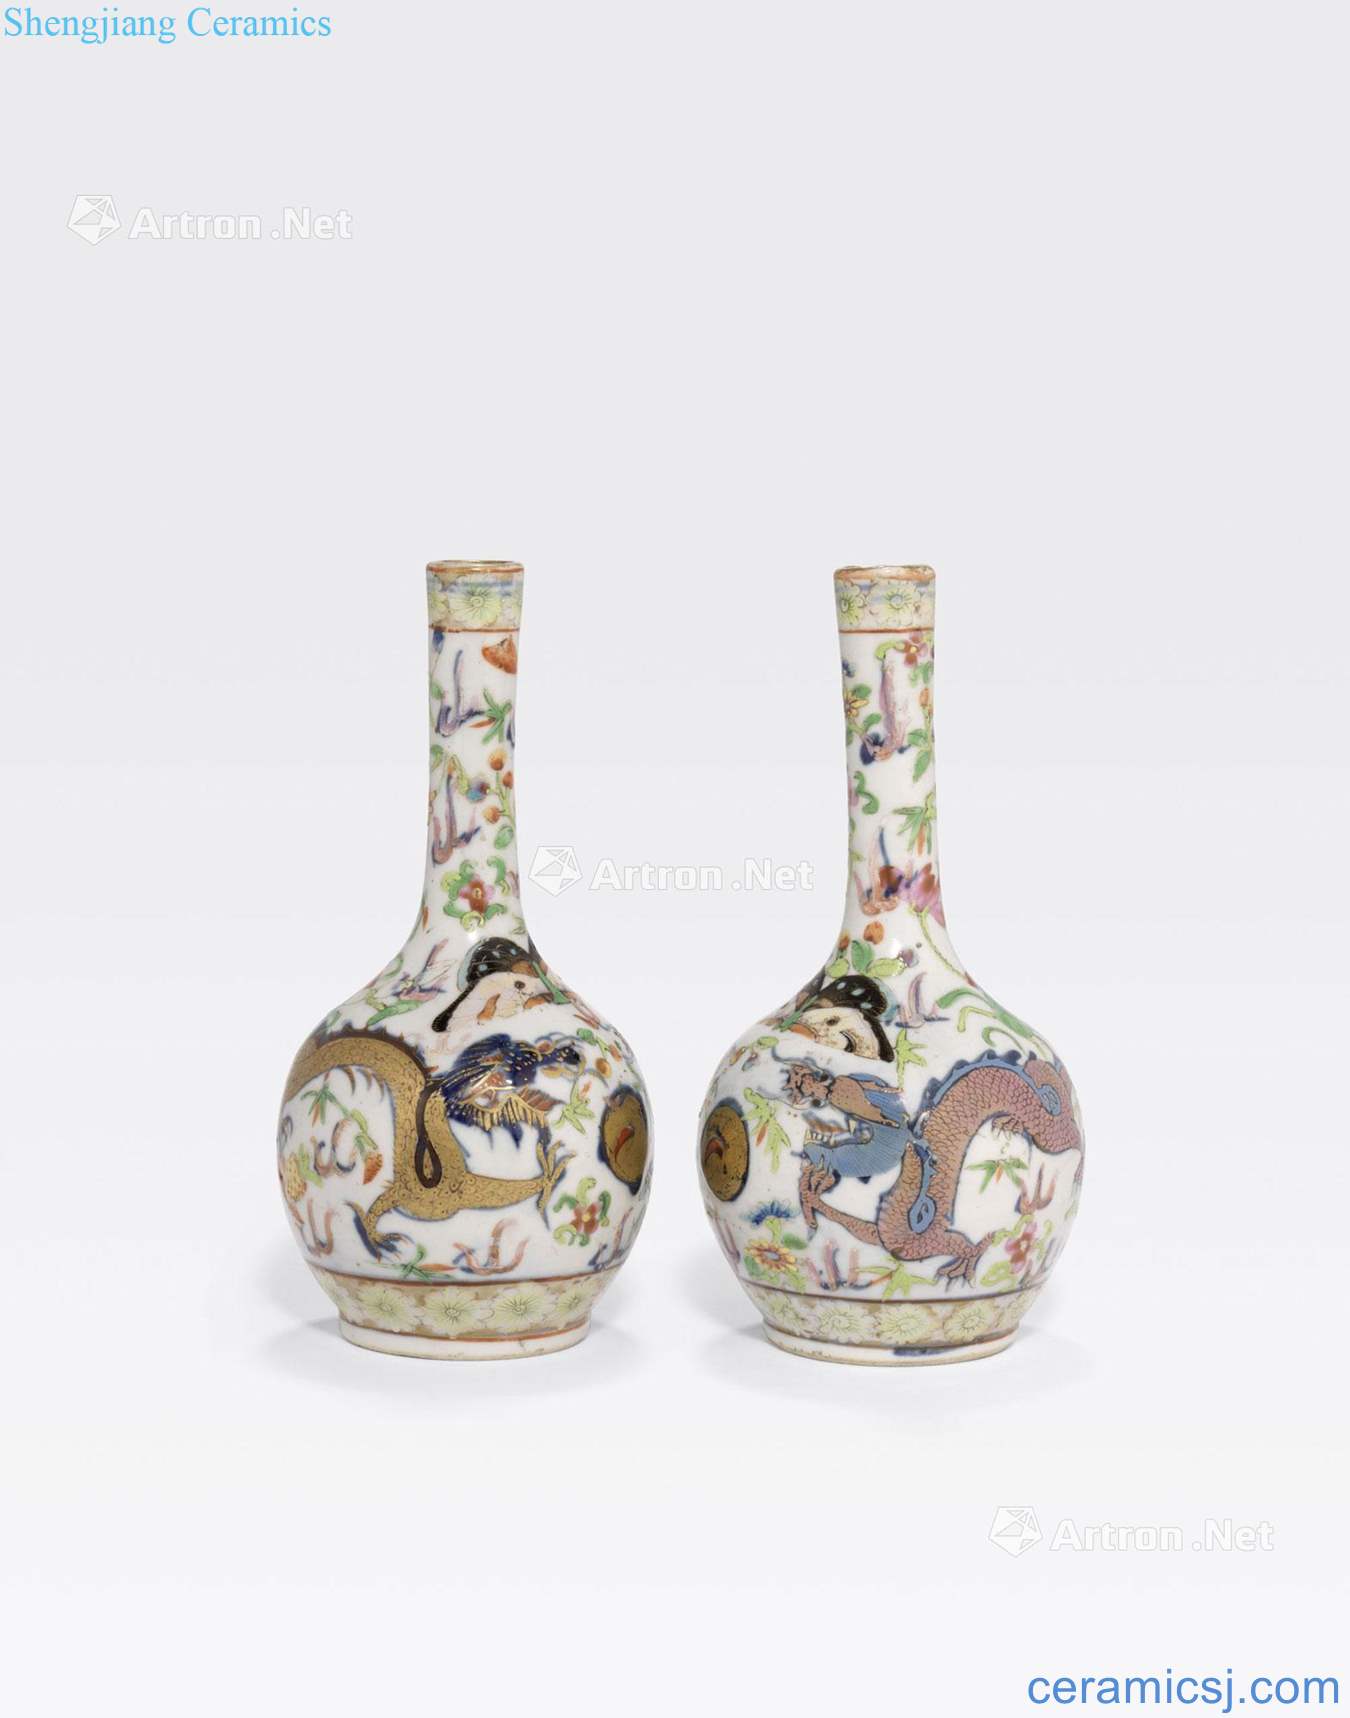 The 19 th century A PAIR OF SMALL STICK NECK VASES WITH UNDERGLAZE BLUE AND FAMILLE ROSE ENAMEL DECORATION